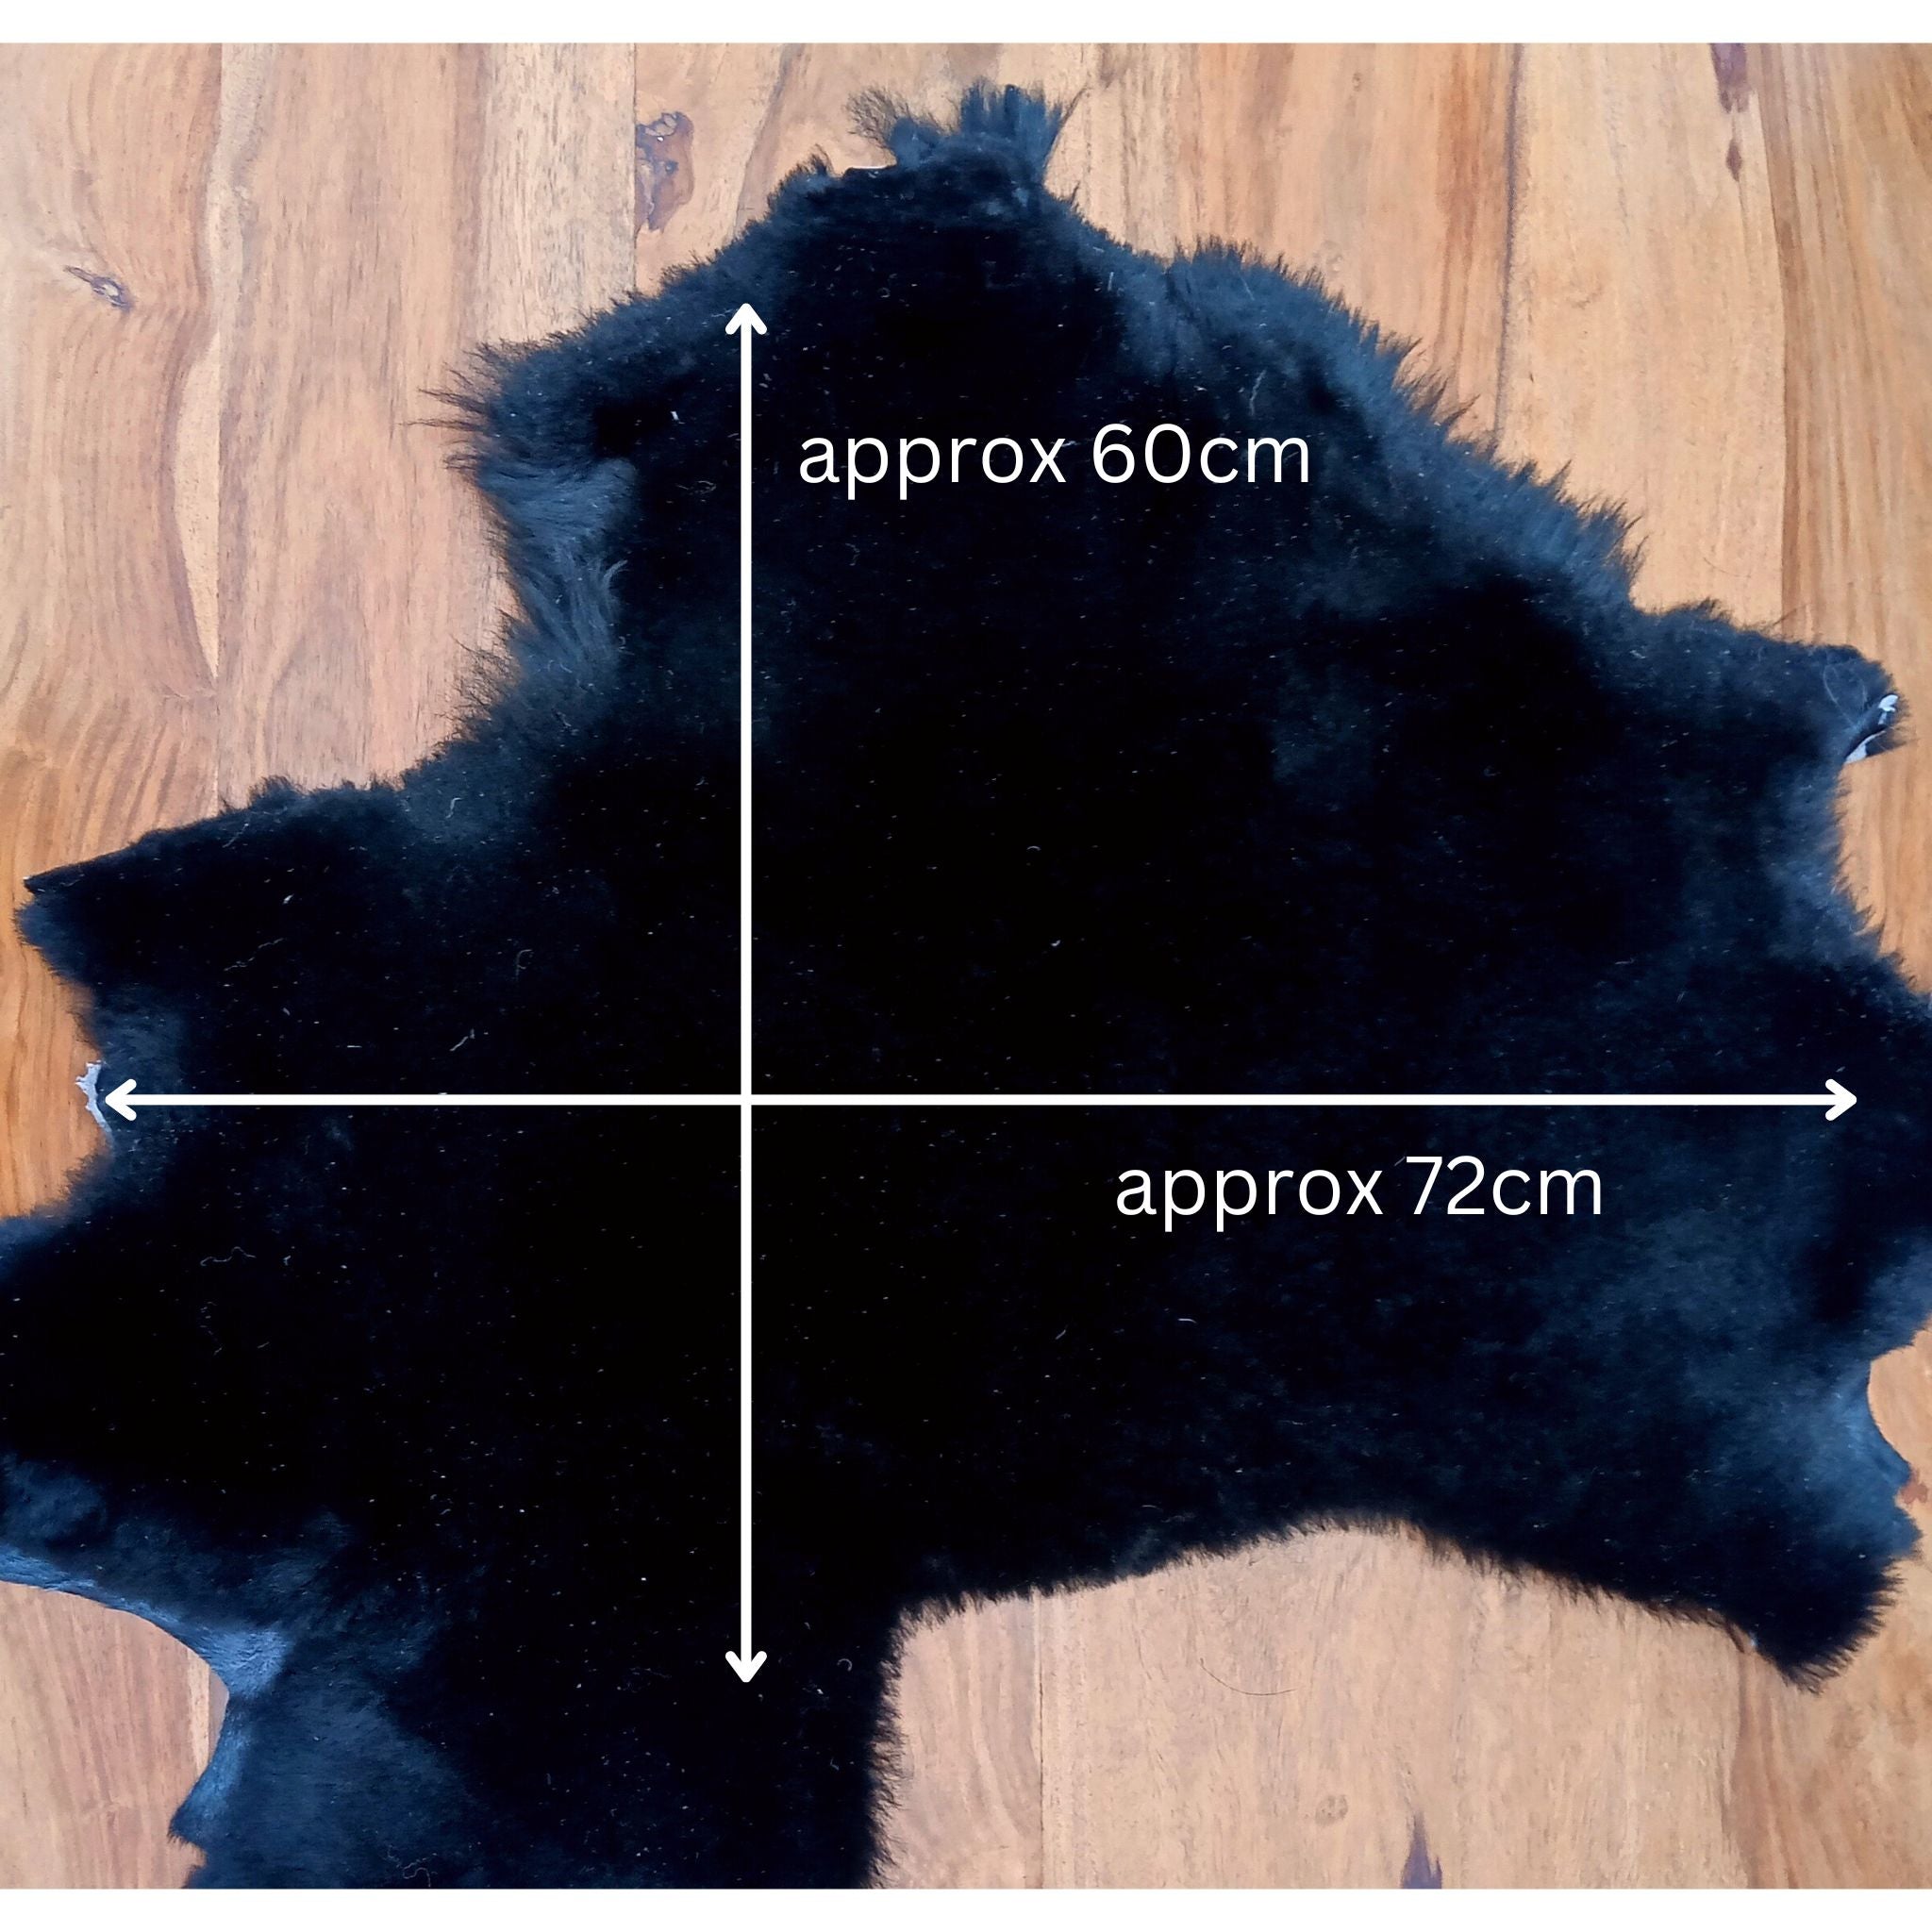 Luxury remnant sheepskins to show approximate sizes